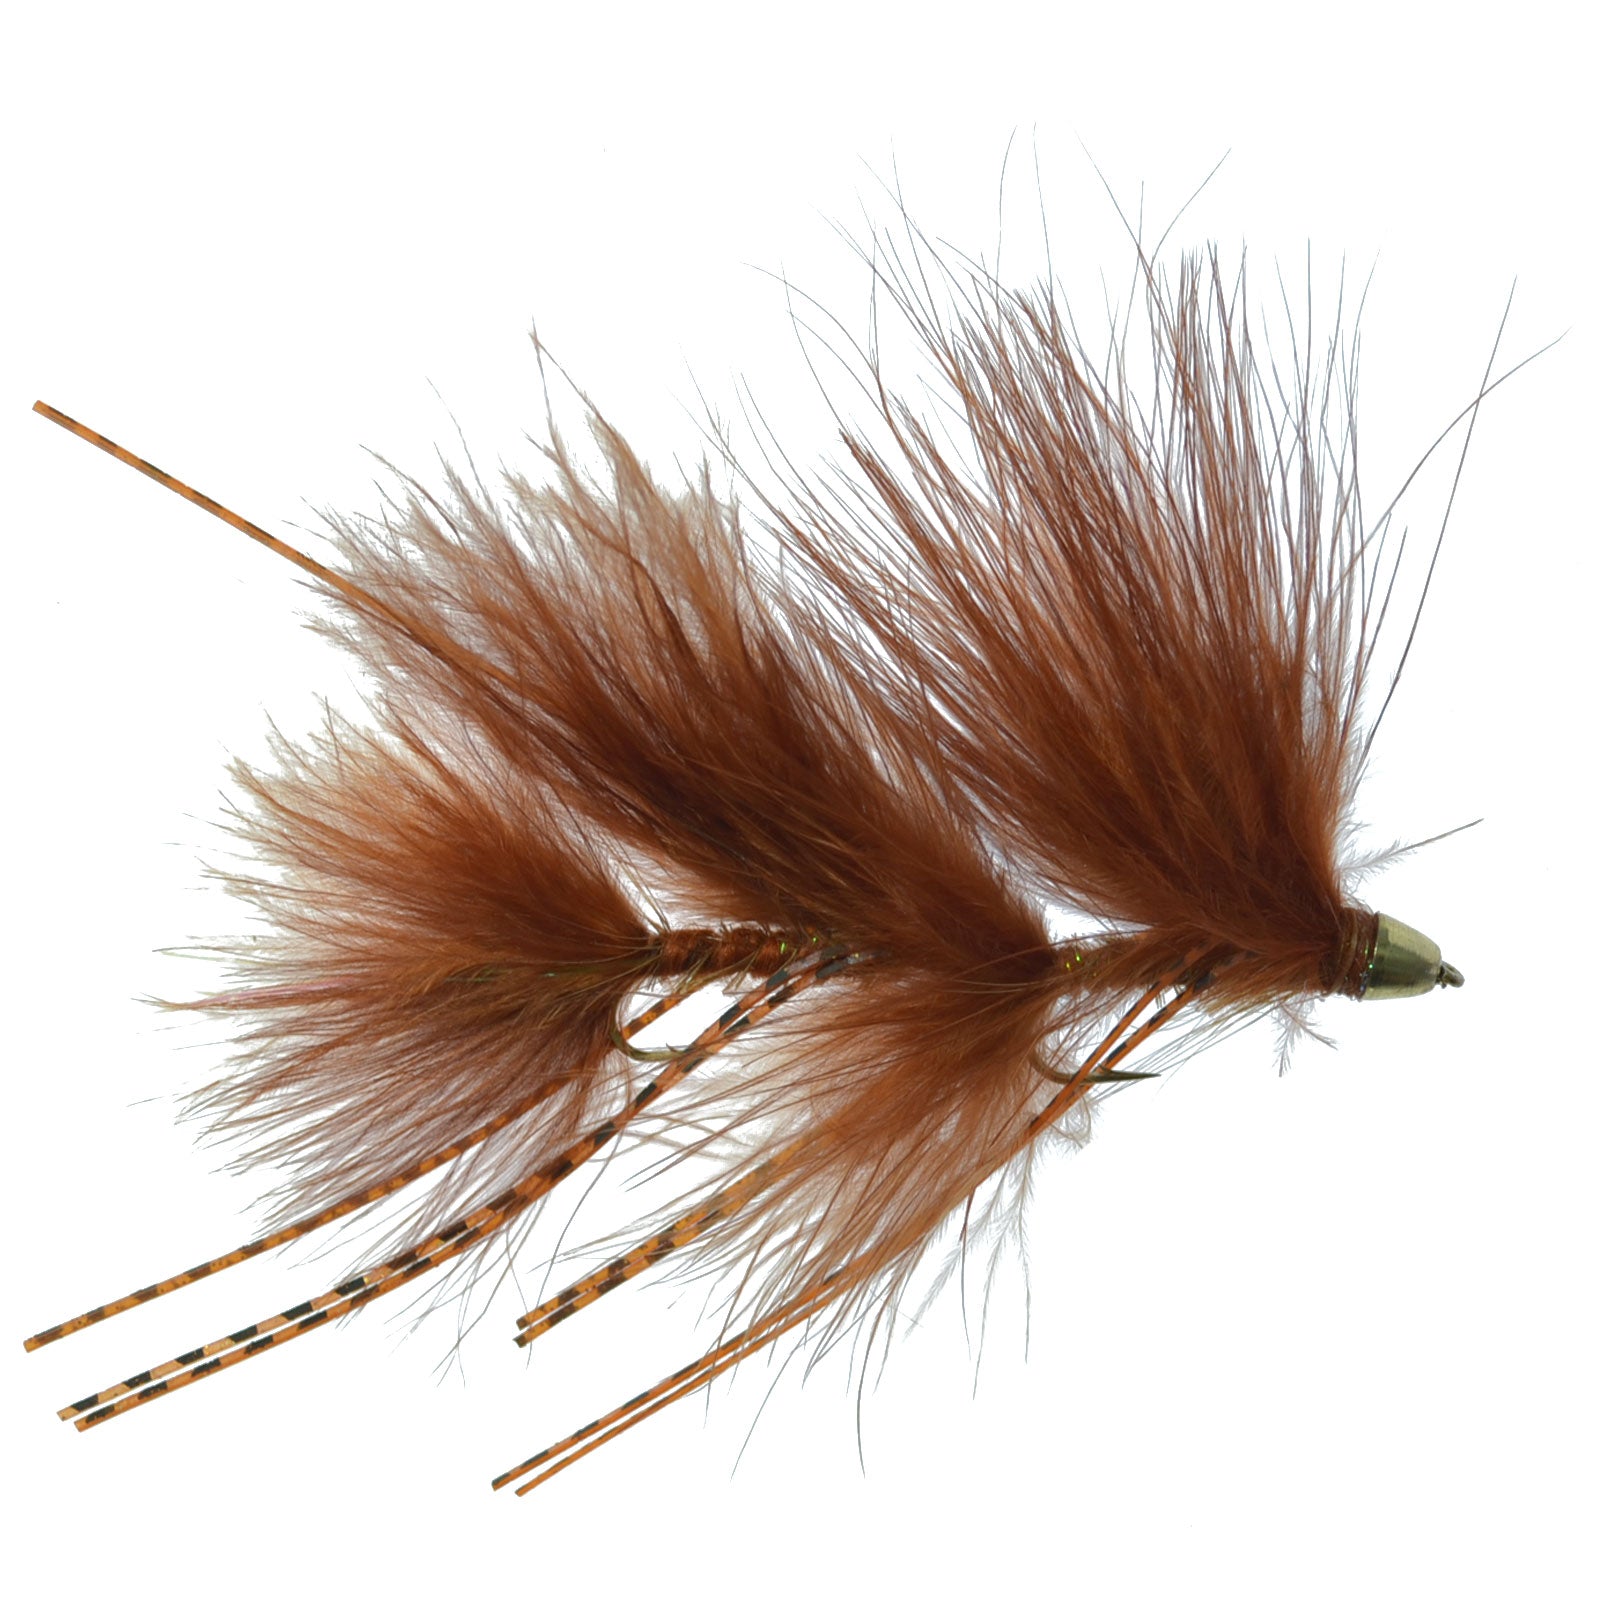 Peanut Envy Streamer Brown - Size 6 - Articulated Trout Bass Steelhead Salmon and Bass Fly Fishing Flies